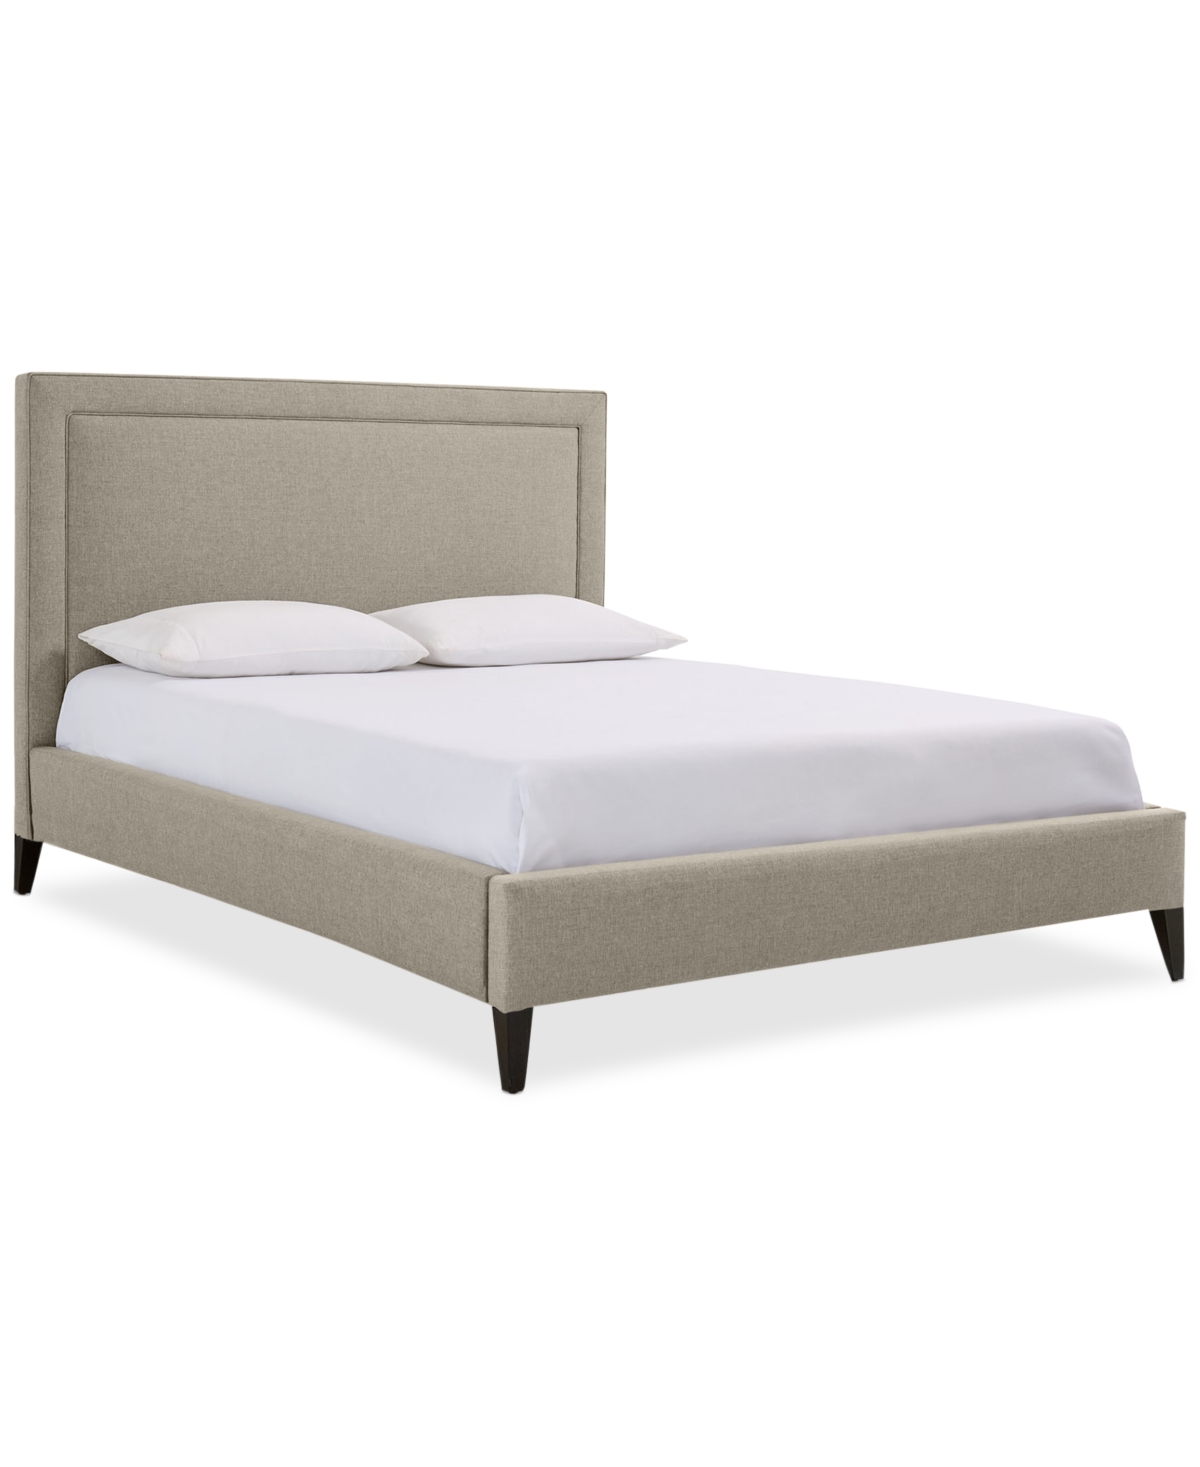 Furniture Naliya Upholstered Full Bed In Parchment